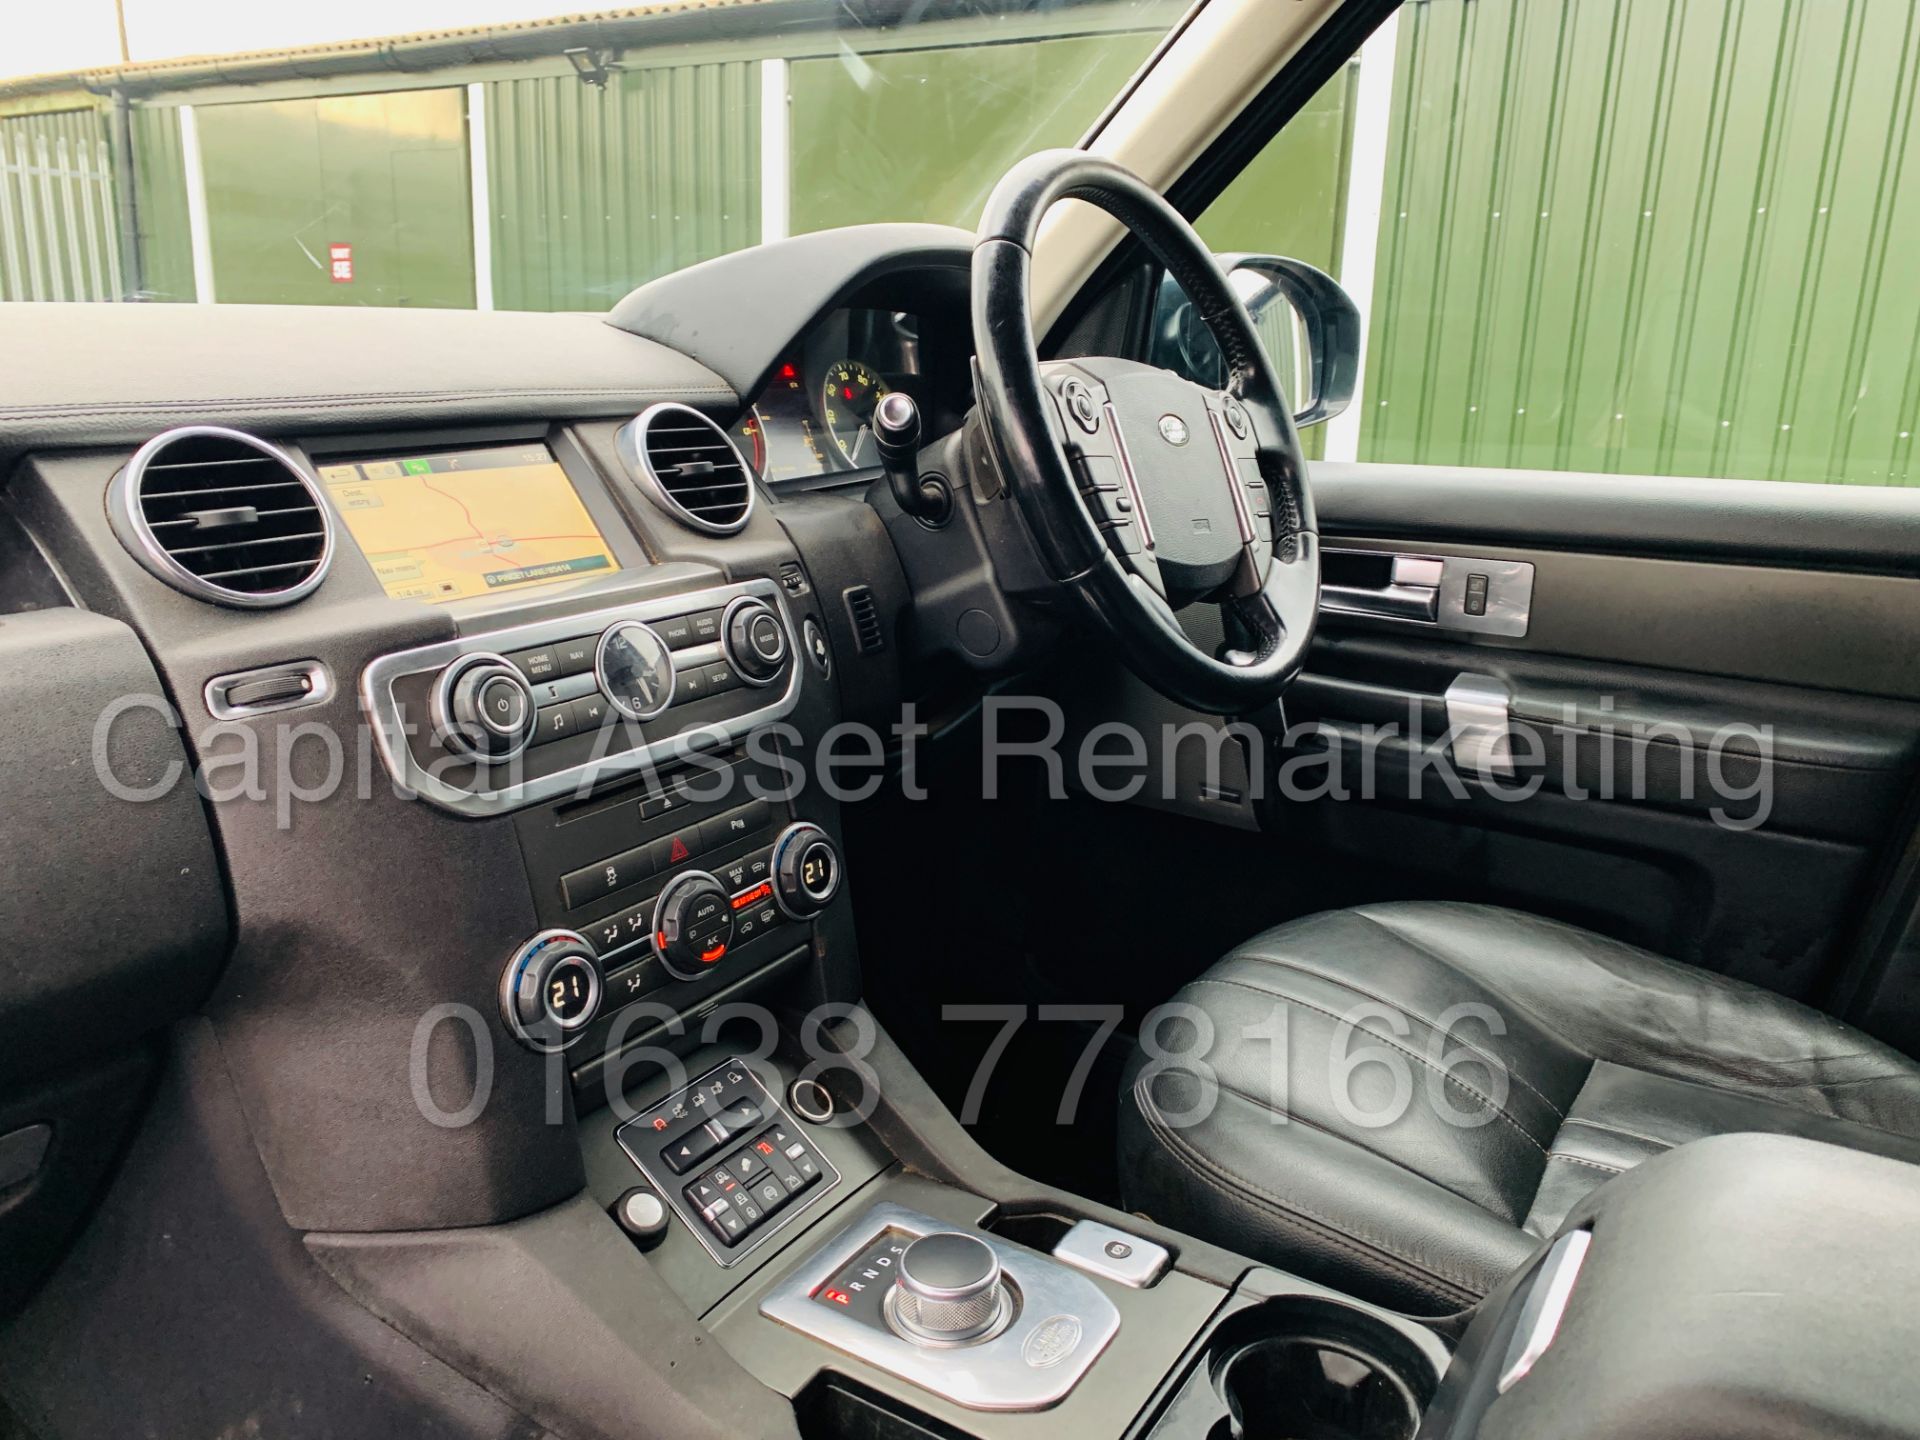 LAND ROVER DISCOVERY 4 *XS EDITION* UTILITY COMMERCIAL (2014) '3.0 SDV6 - 8 SPEED AUTO' *TOP SPEC* - Image 19 of 49